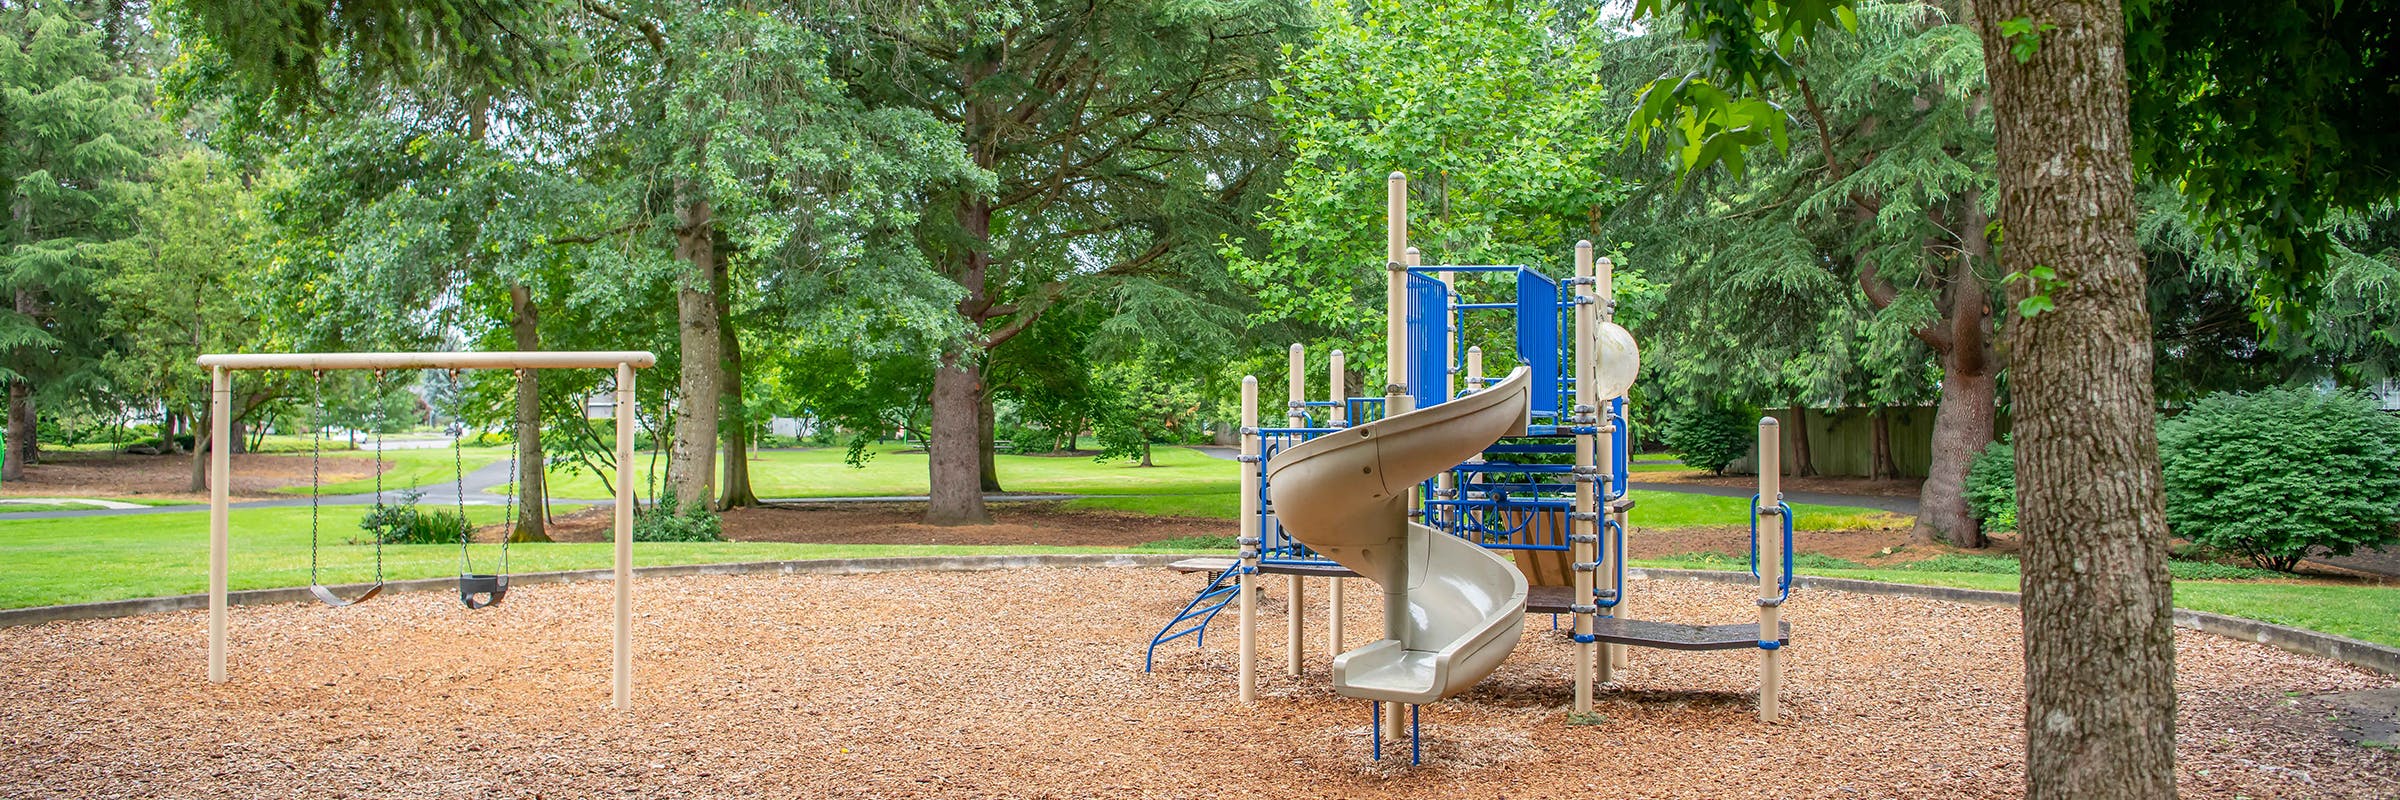 An old blue and tan metal play structure with slides and platforms surrounded by wood chips in a lush, green park. 